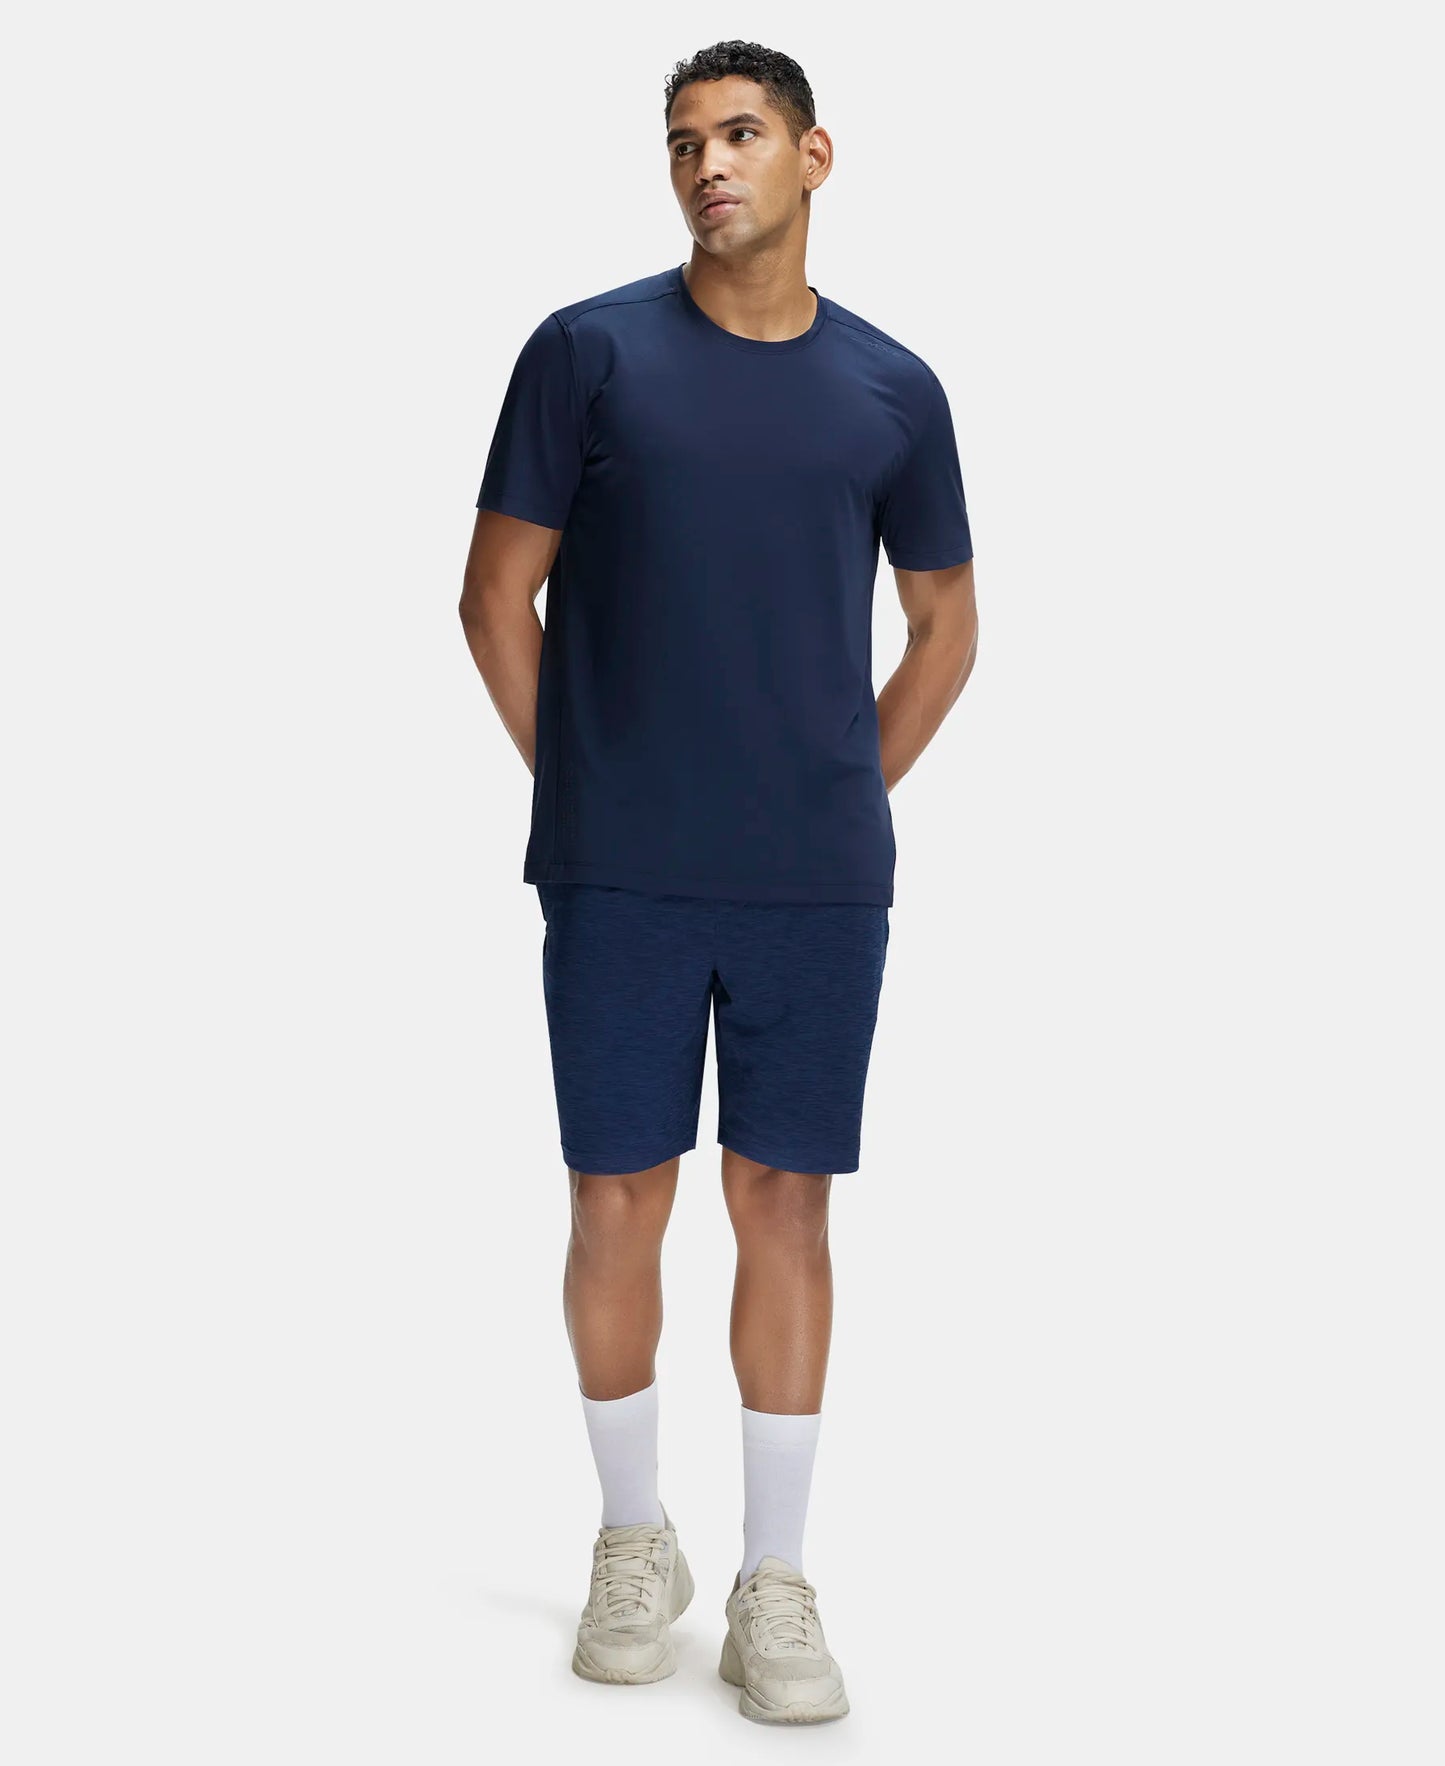 Lightweight Microfiber Shorts with Zipper Pockets and StayFresh Treatment - Navy-6